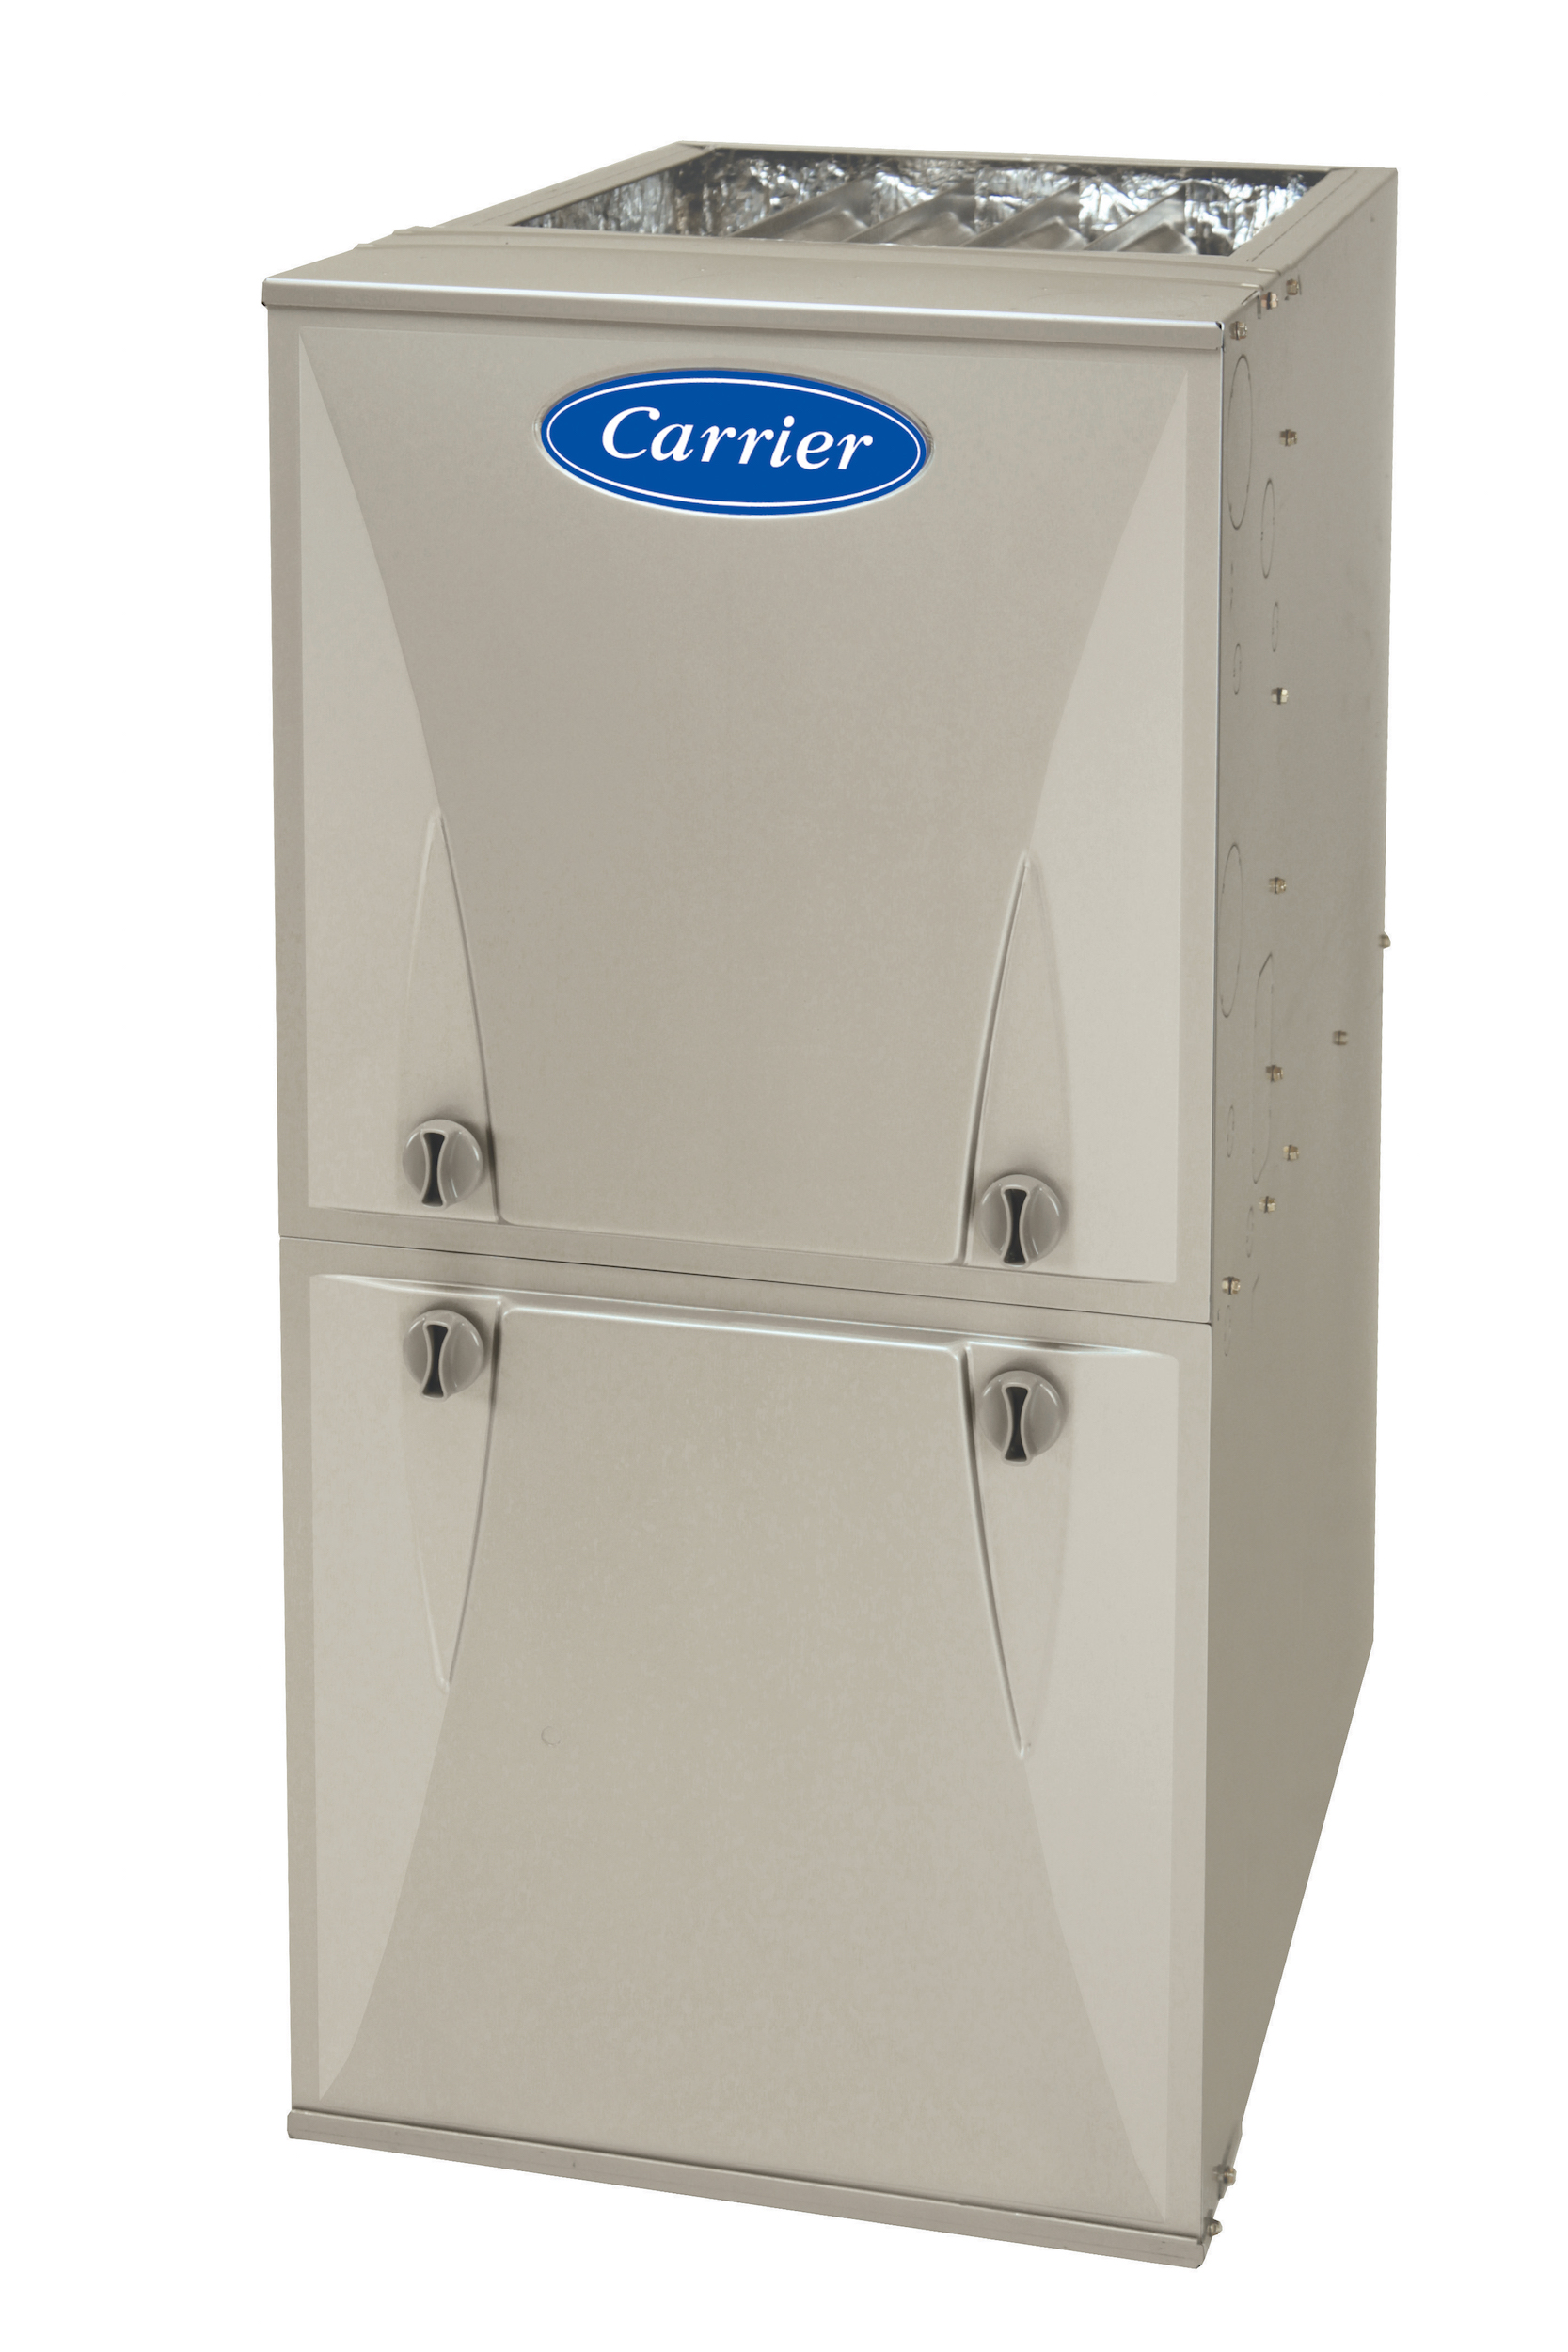 Carrier Comfort 92 Gas Furnace Parts